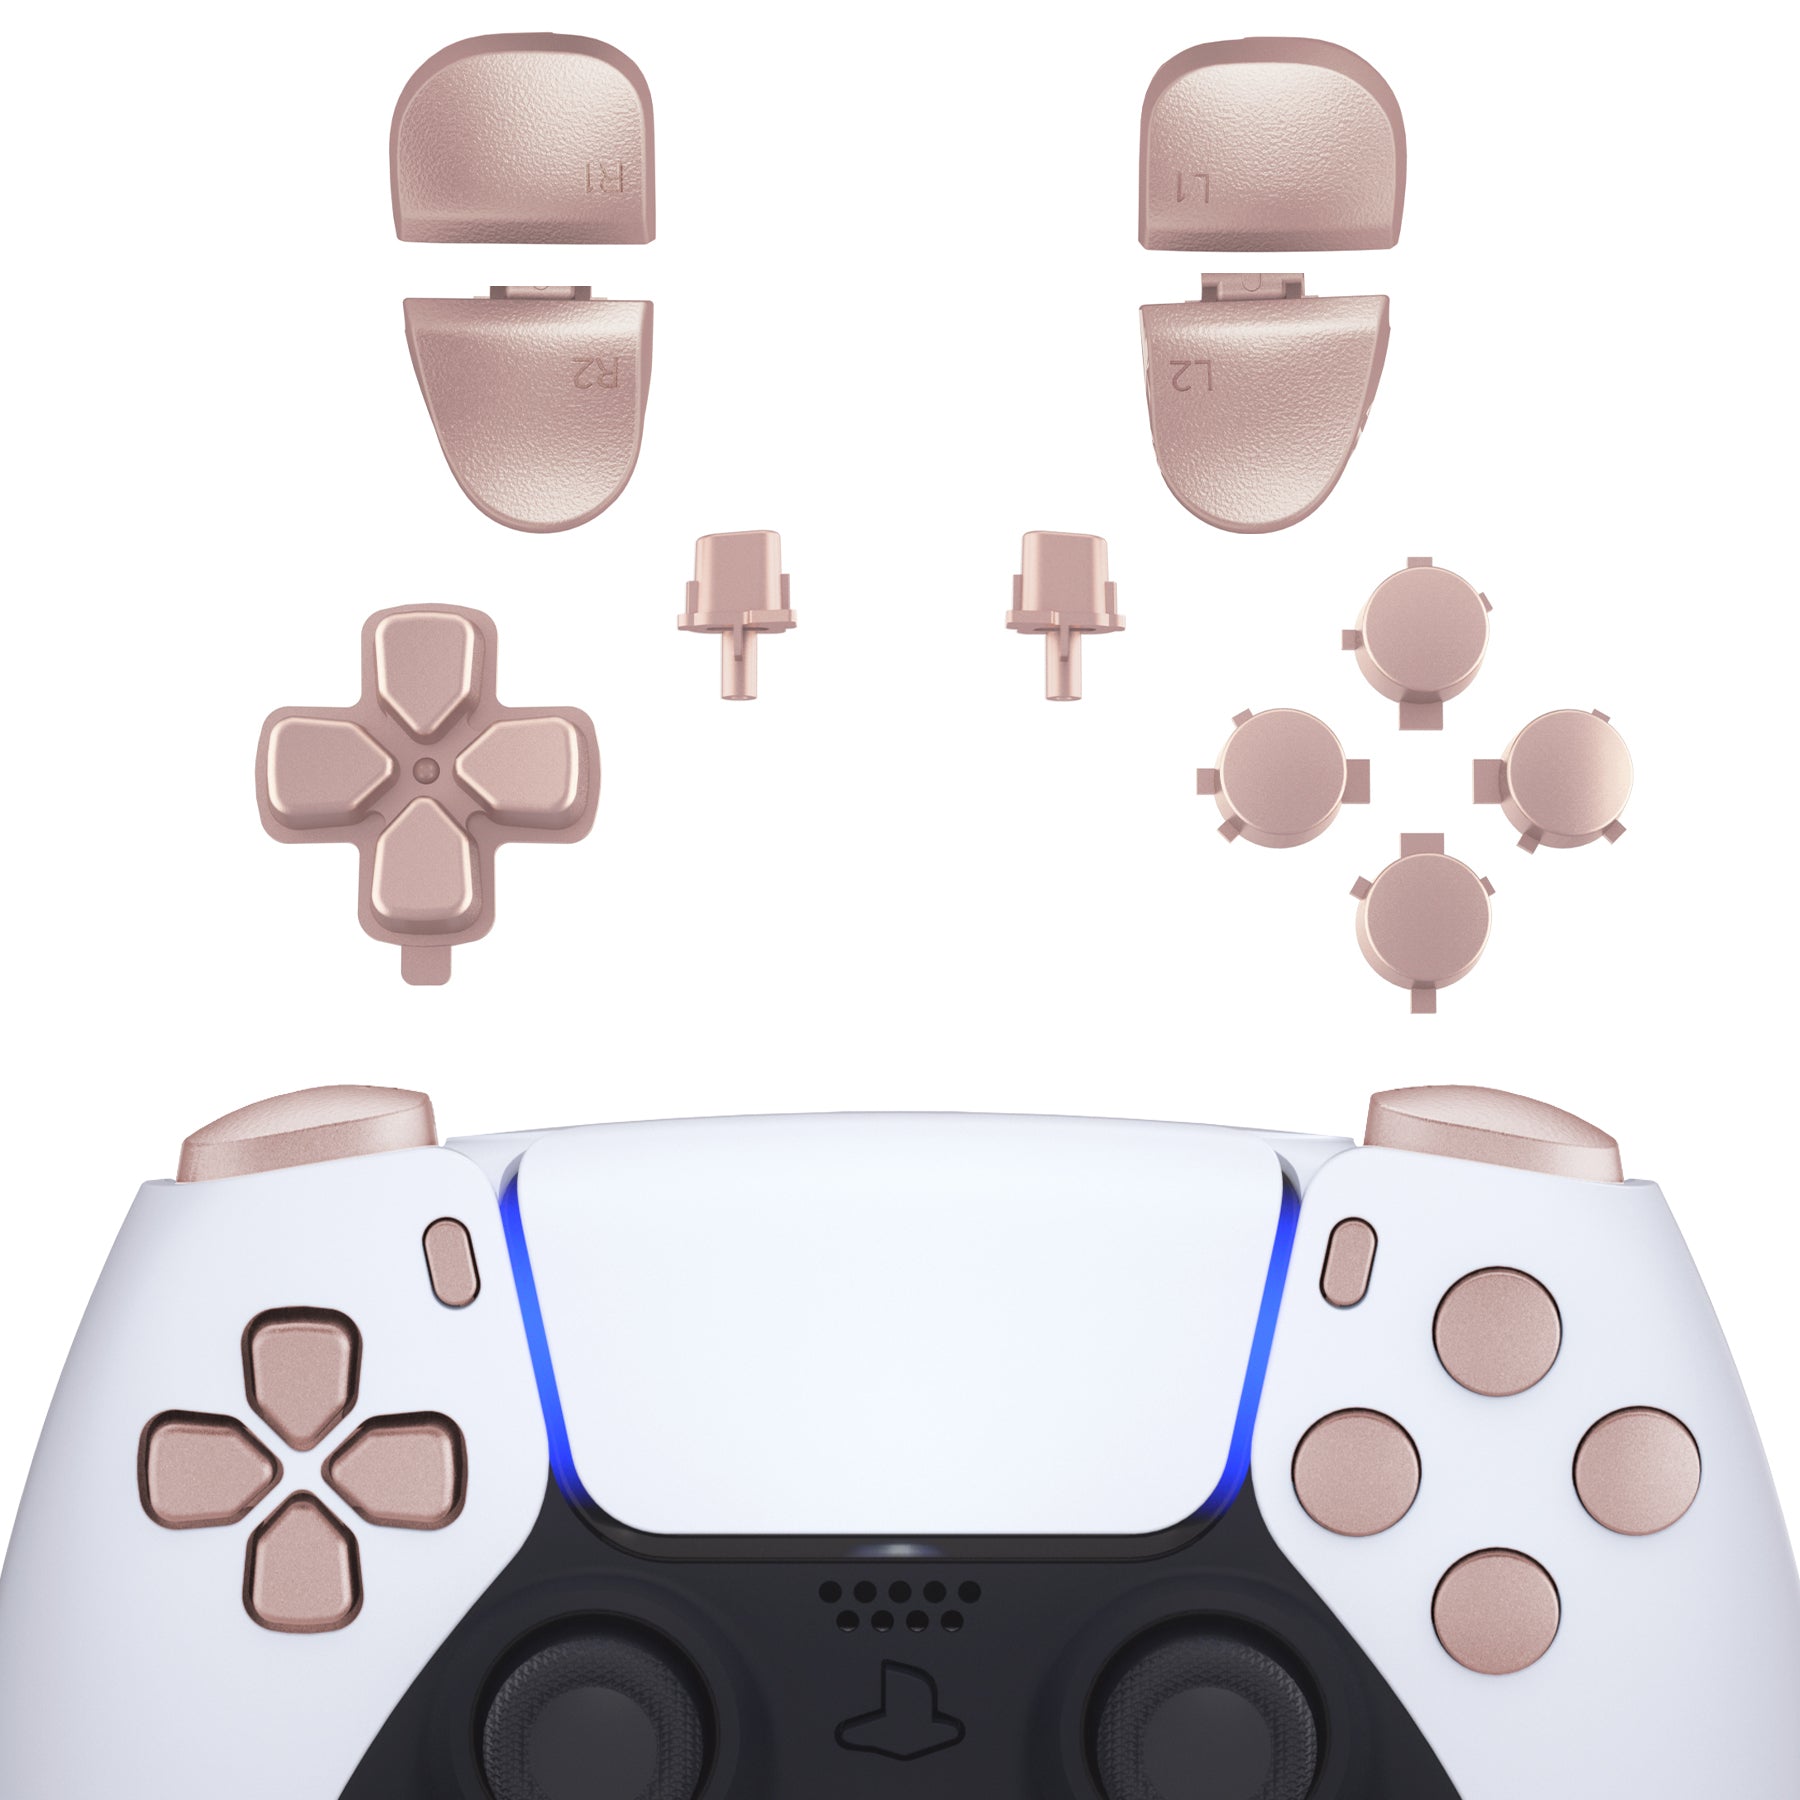 eXtremeRate Retail Replacement D-pad R1 L1 R2 L2 Triggers Share Options Face Buttons, Metallic Rose Gold Full Set Buttons Compatible with ps5 Controller BDM-030 - JPF1040G3